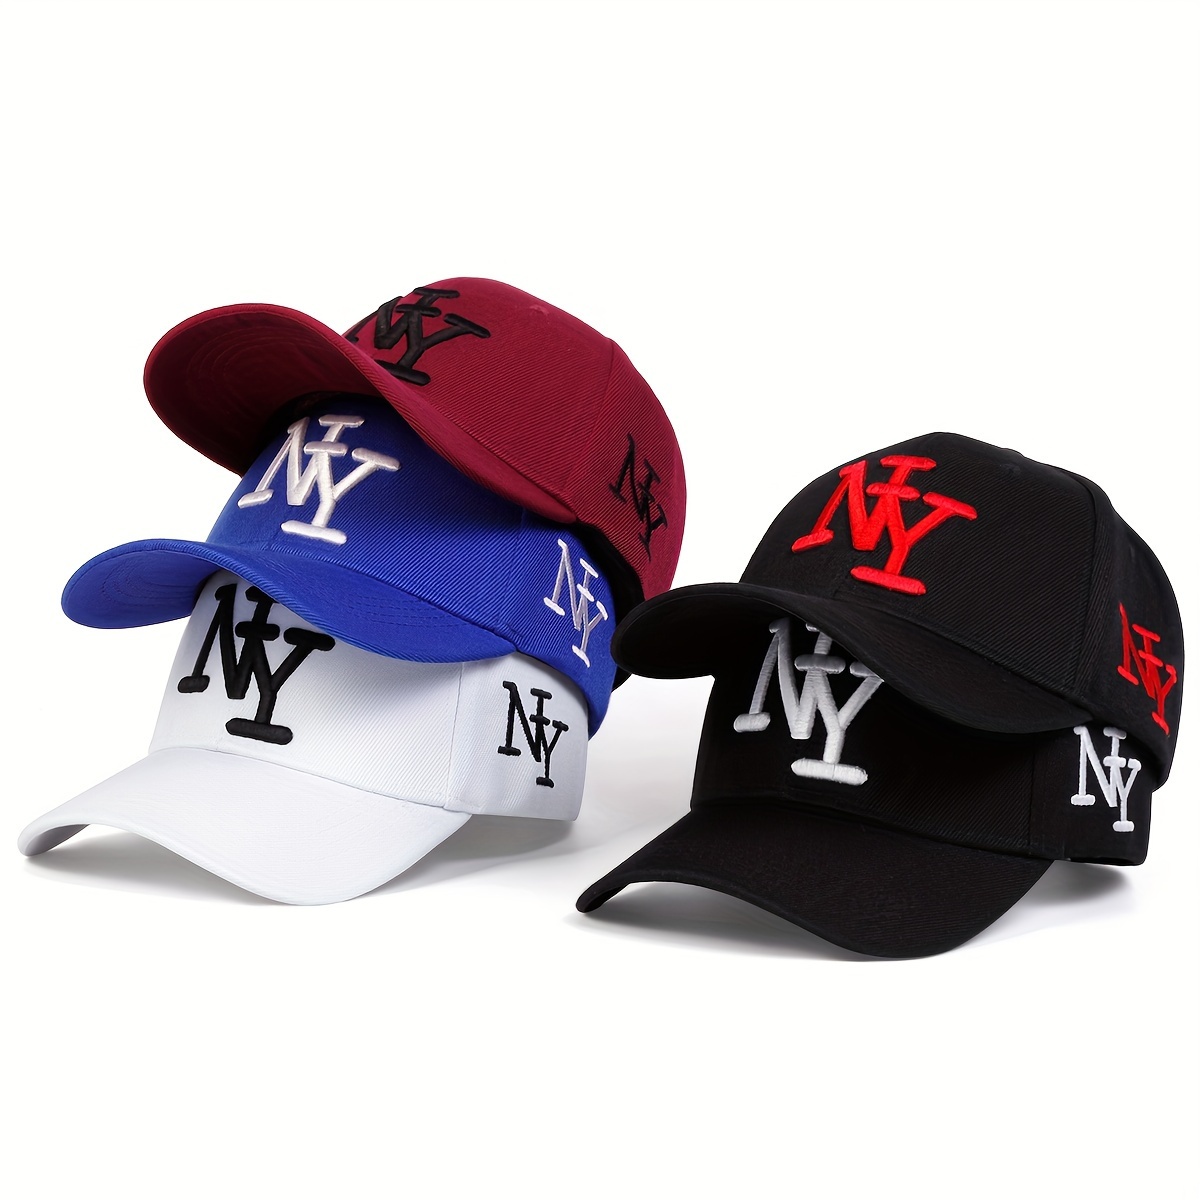 

1pc Unisex Sunshade Breathable Adjustable Baseball Cap With Ny Letter Embroidery For Outdoor Sport